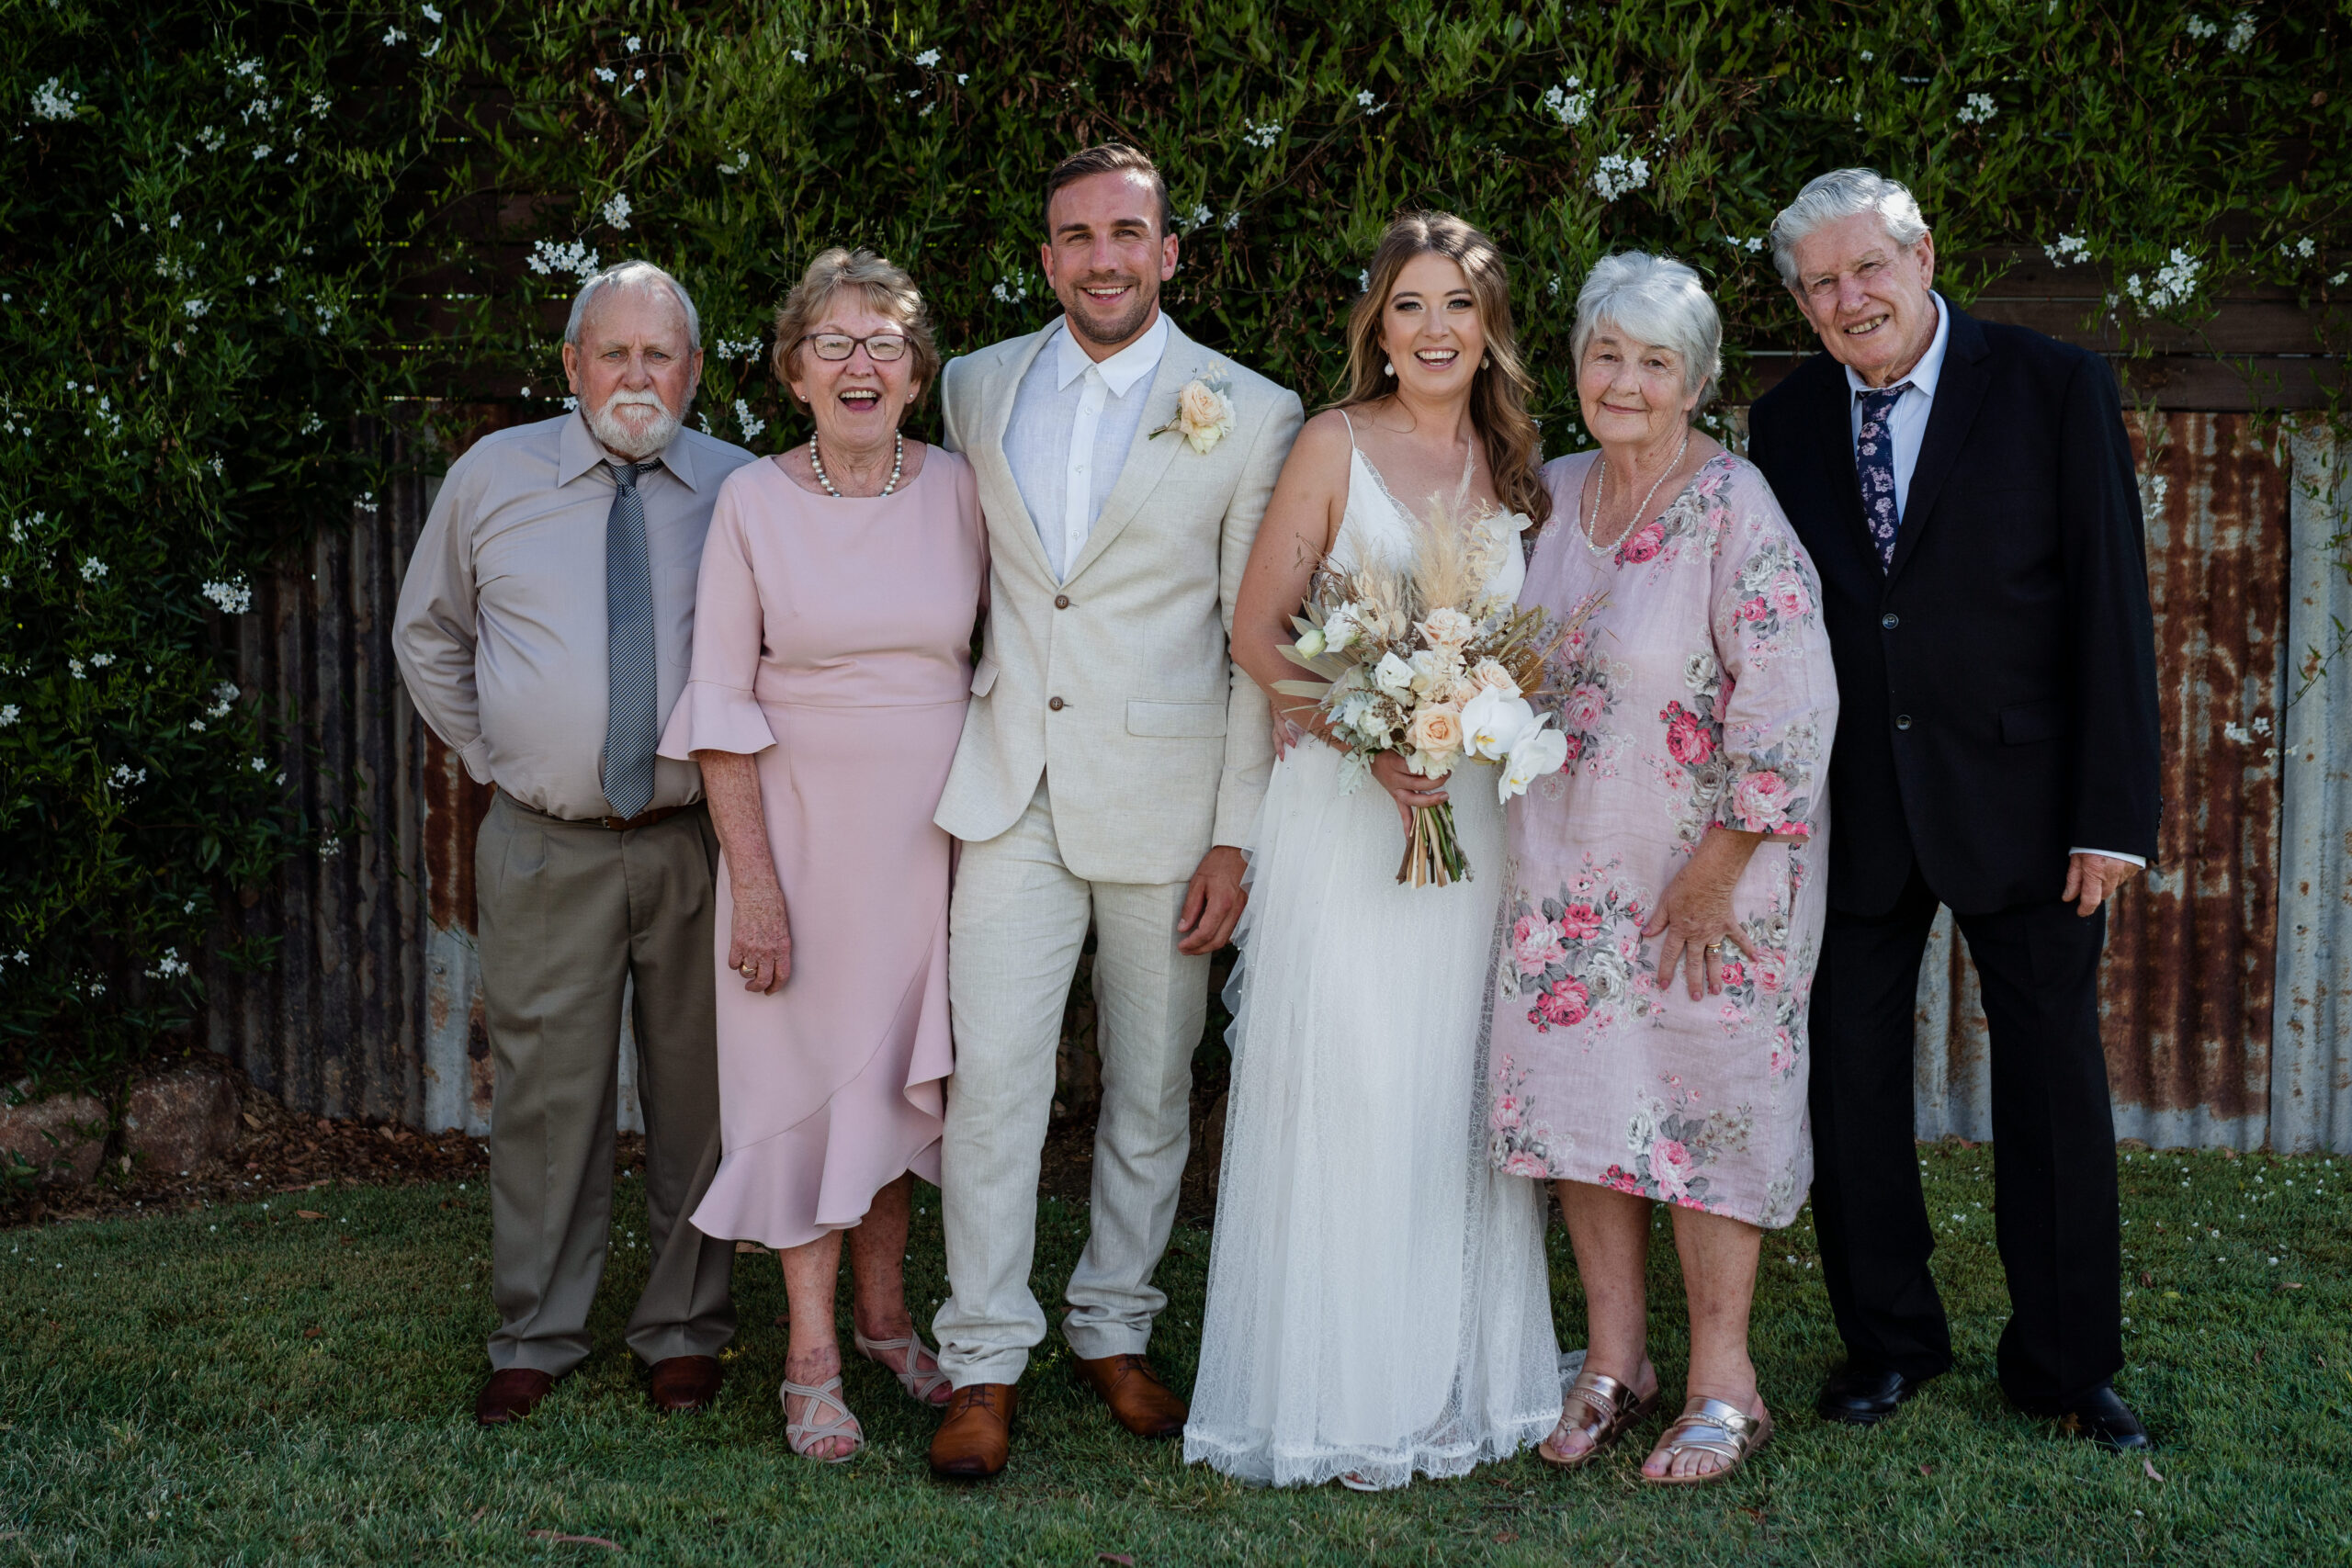 Grandparents with the bride and groom: Billy and Lyn Richardson, Blake and Cayla Richardson, Pam and Geoff Packer.